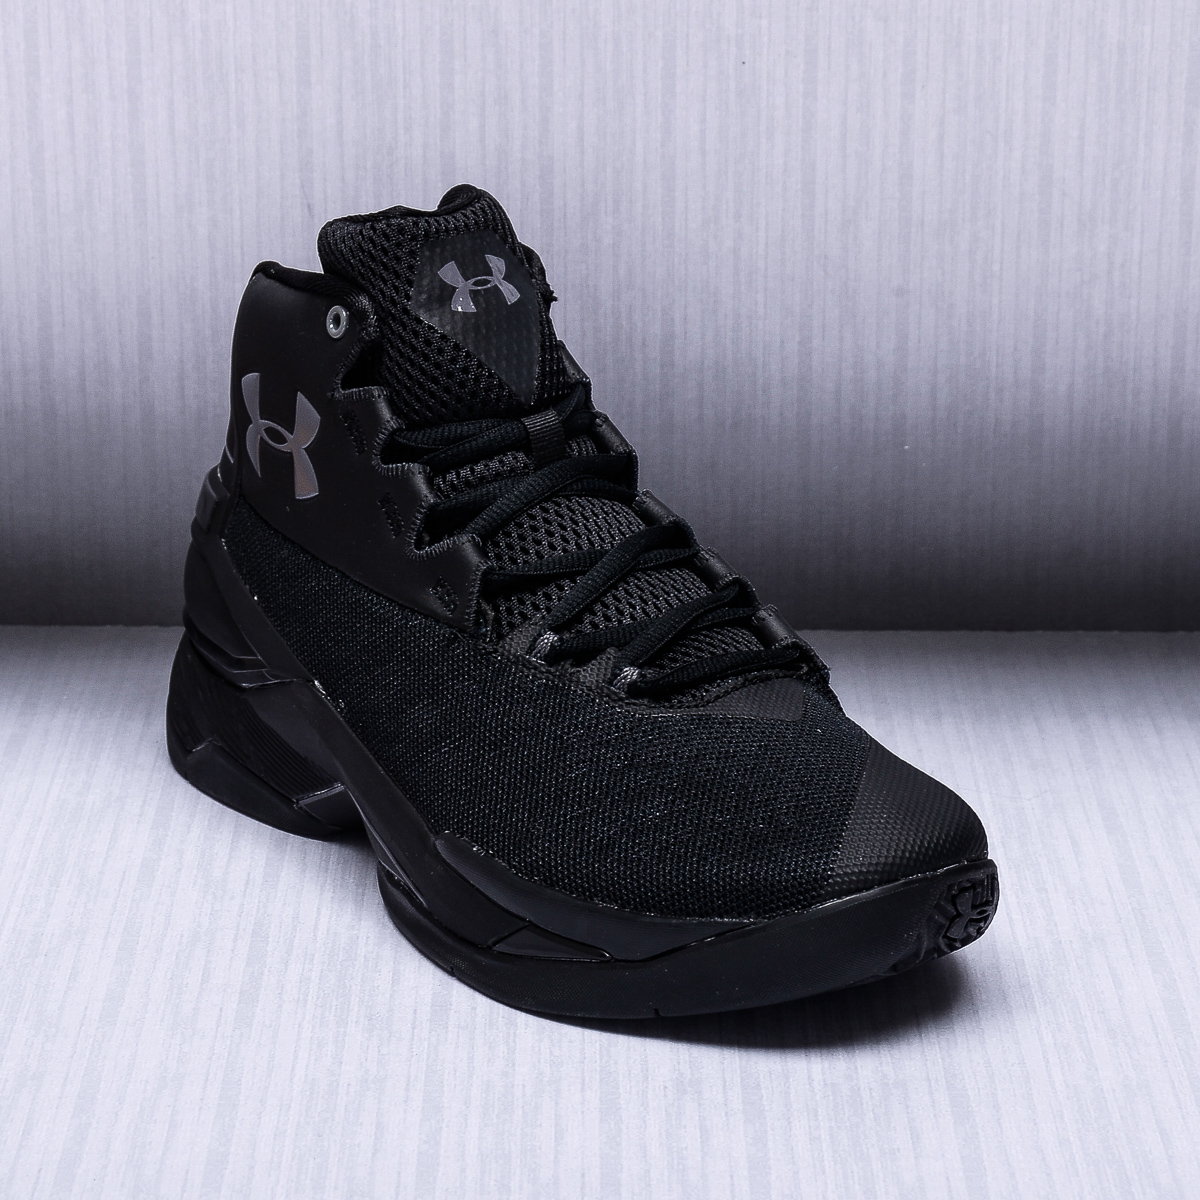 all black under armor shoes